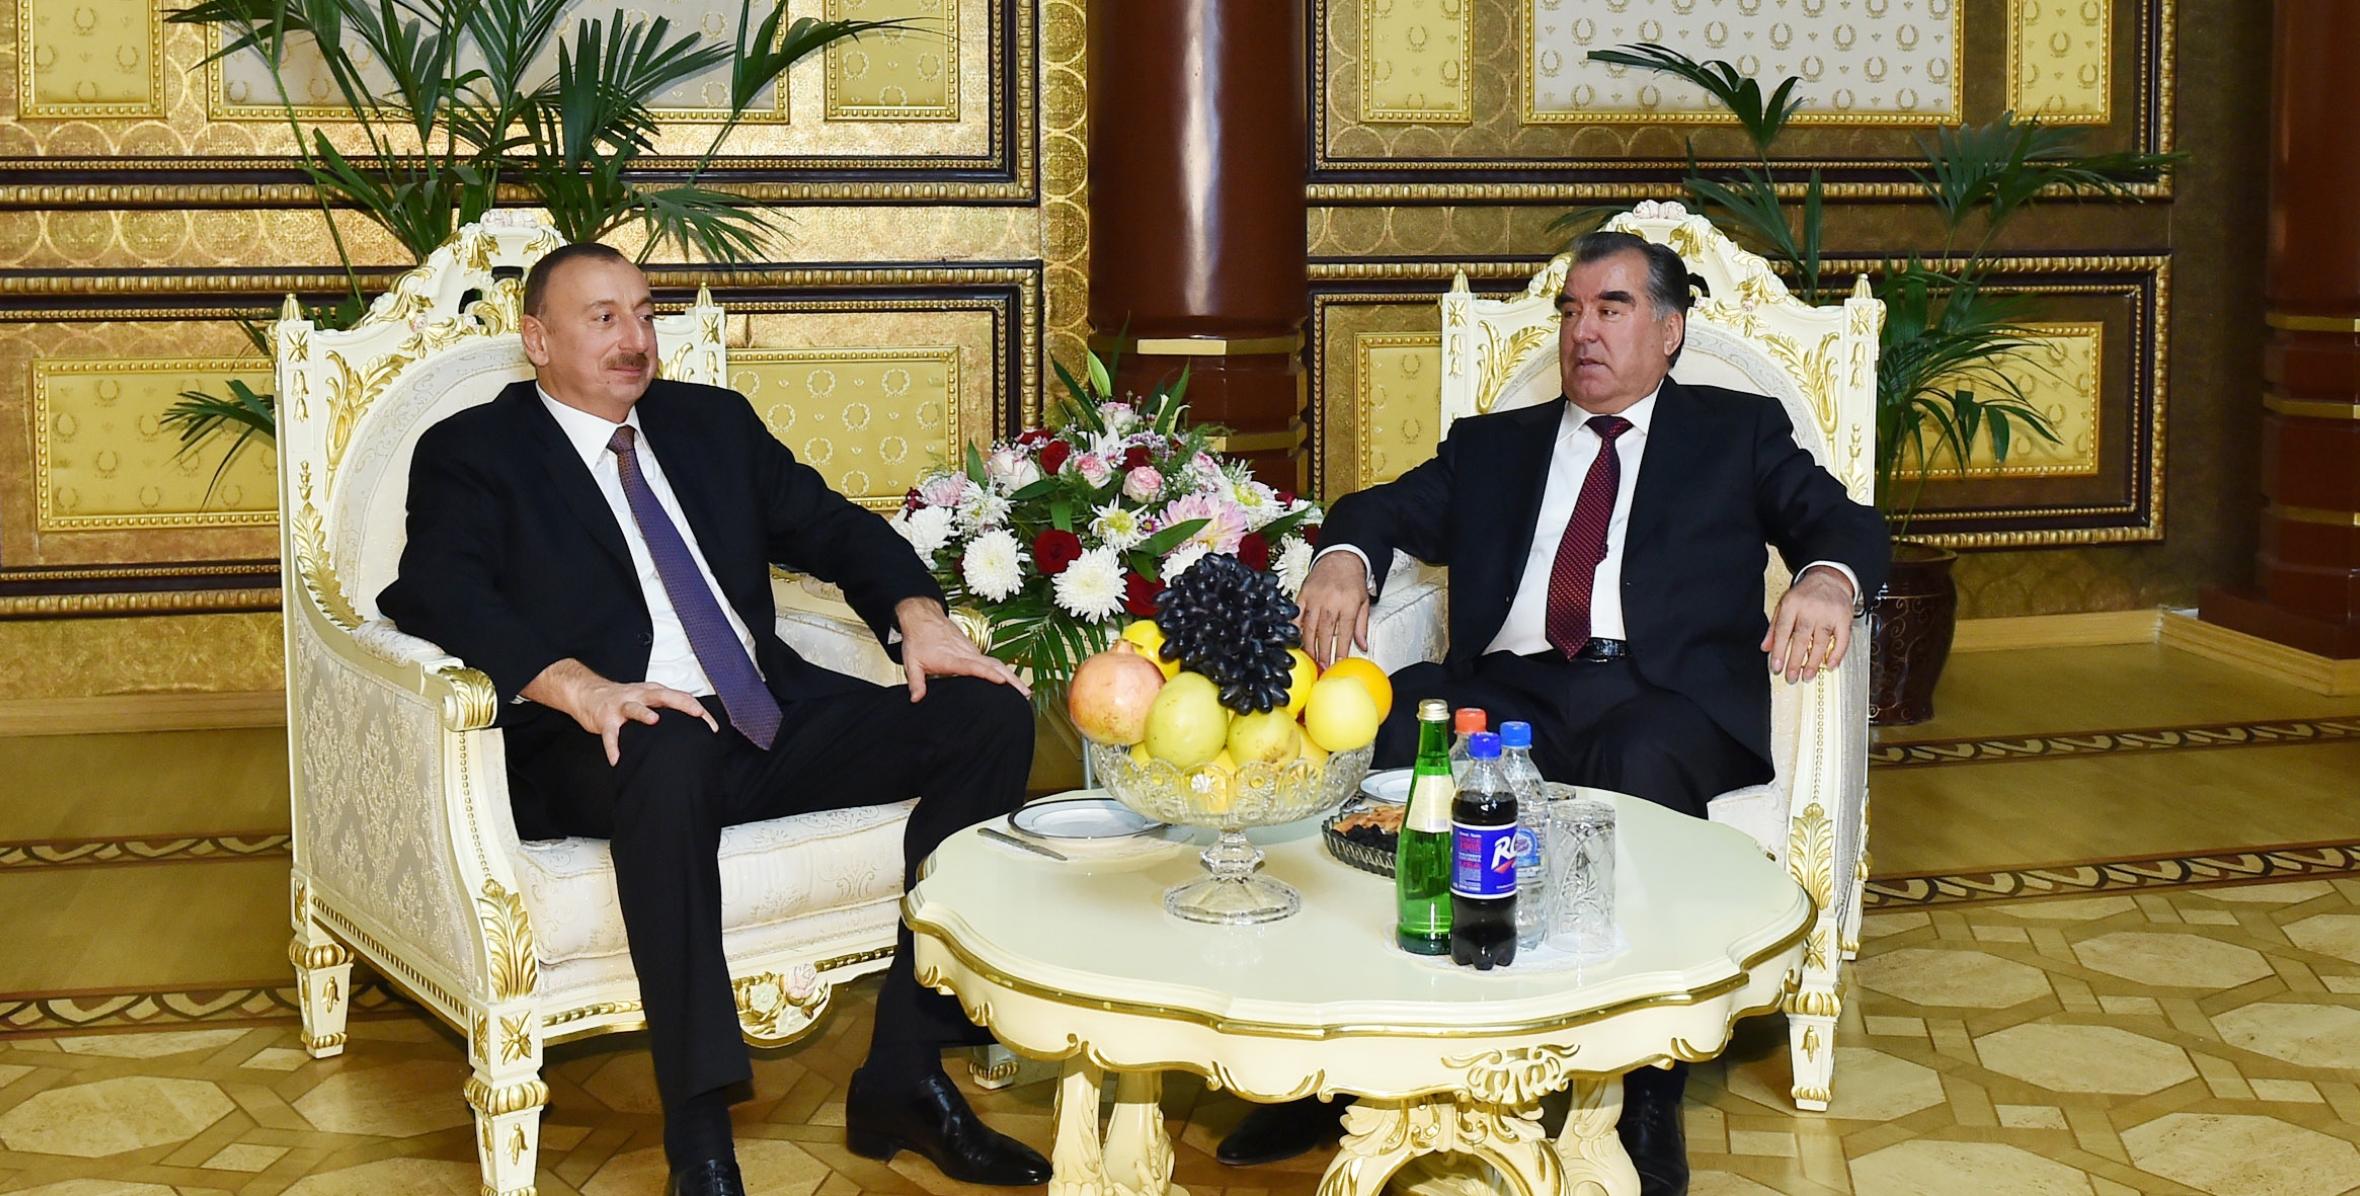 Ilham Aliyev’s official visit to Tajikistan ended